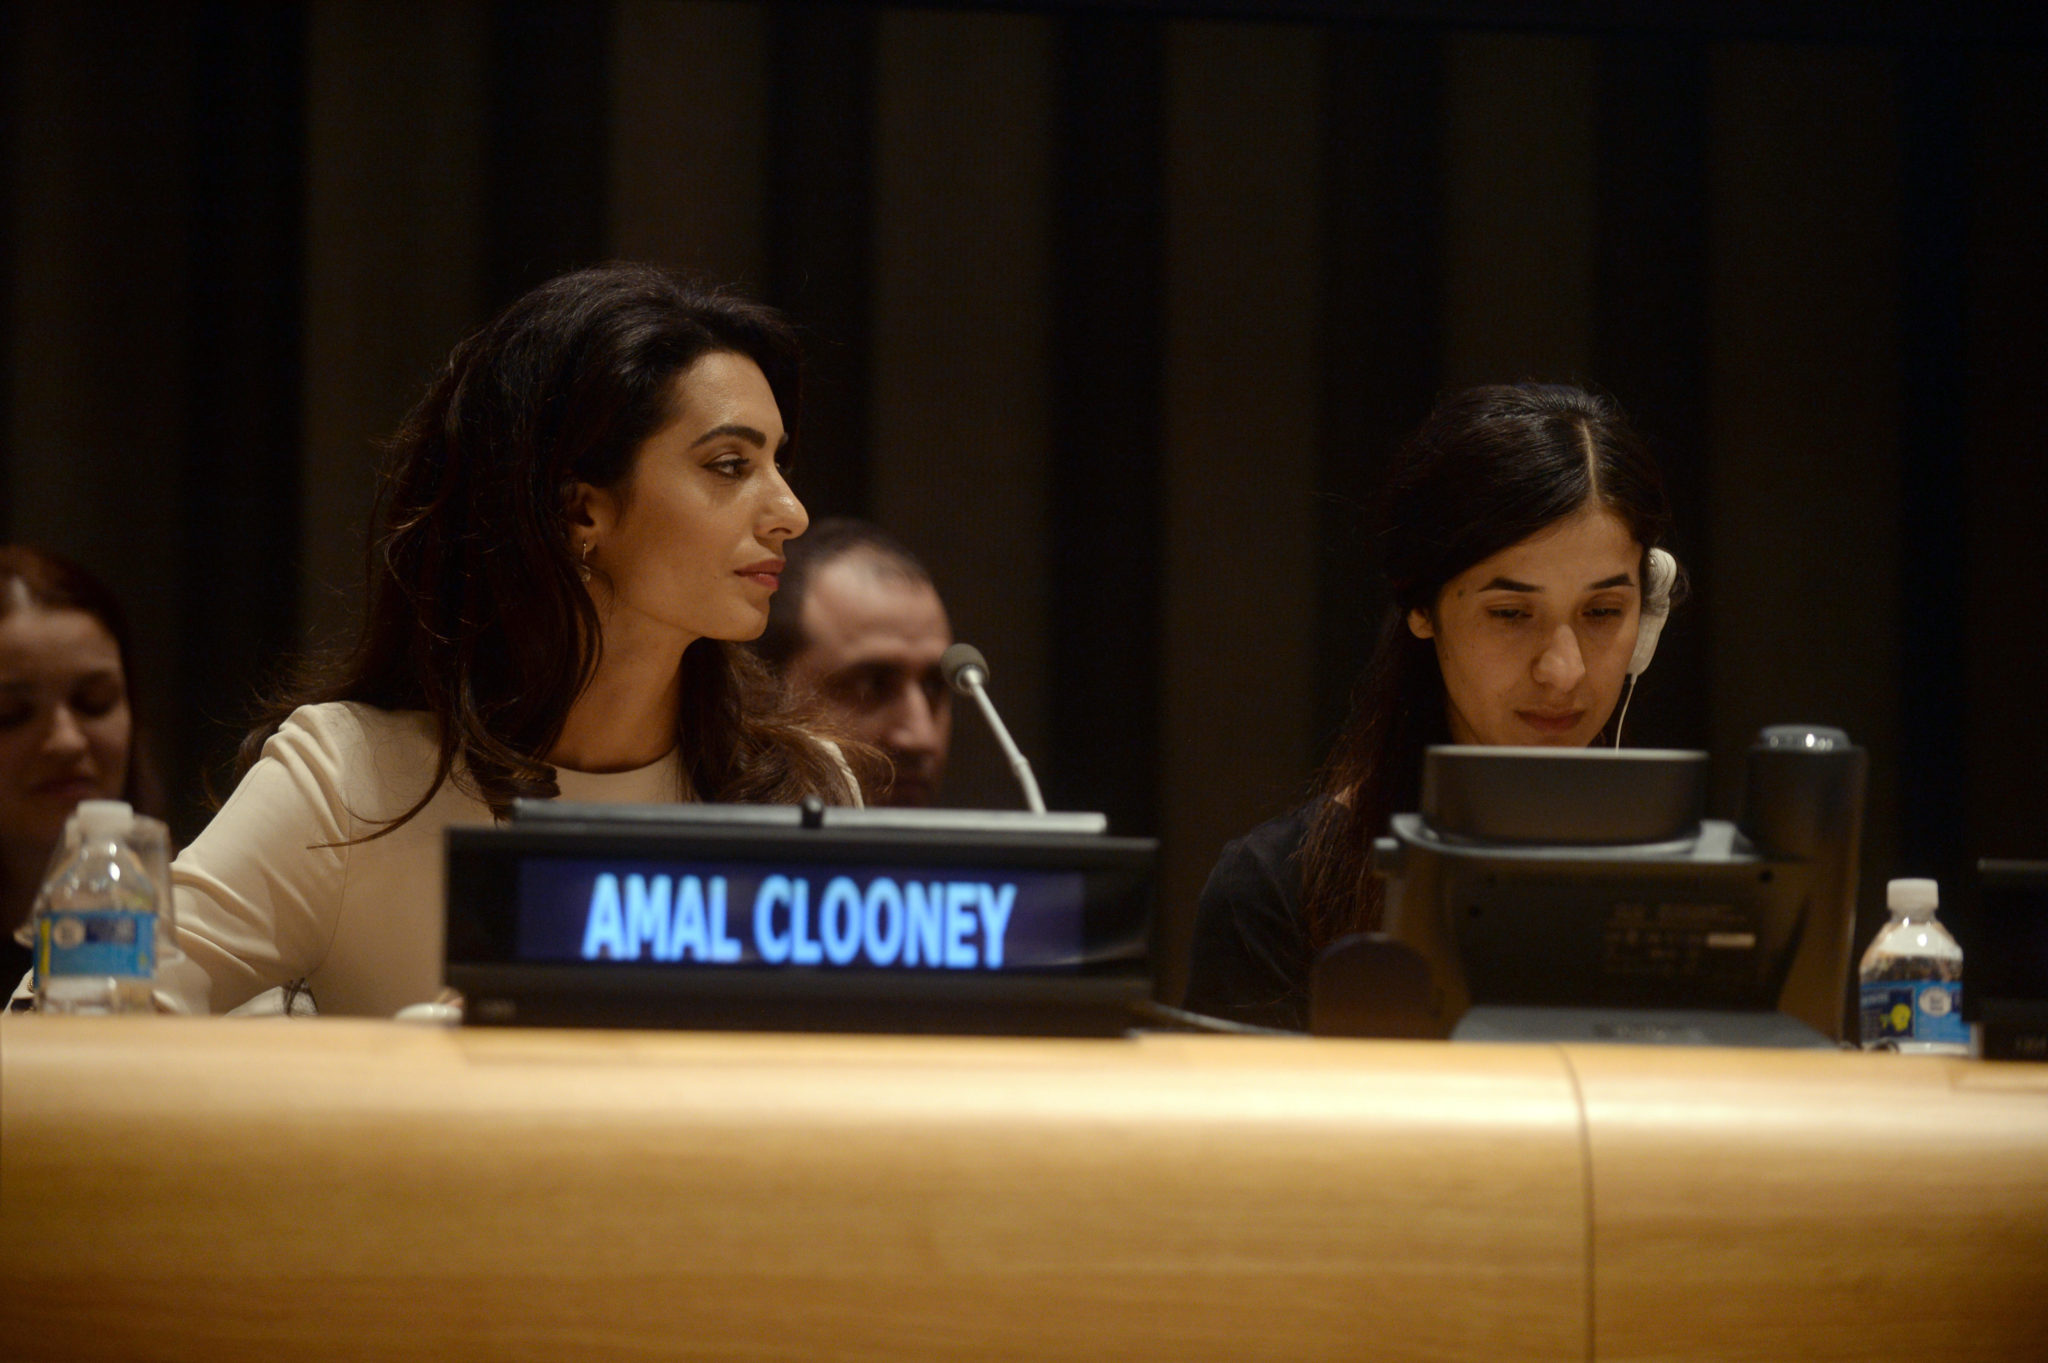 Amal Clooney attends the Women In The World reception honouring appointment of UN Office on Drugs and Crime Goodwill Ambassador Nadia Murad, 16-09-2016. Image: Storms Media Group / Alamy Stock Photo